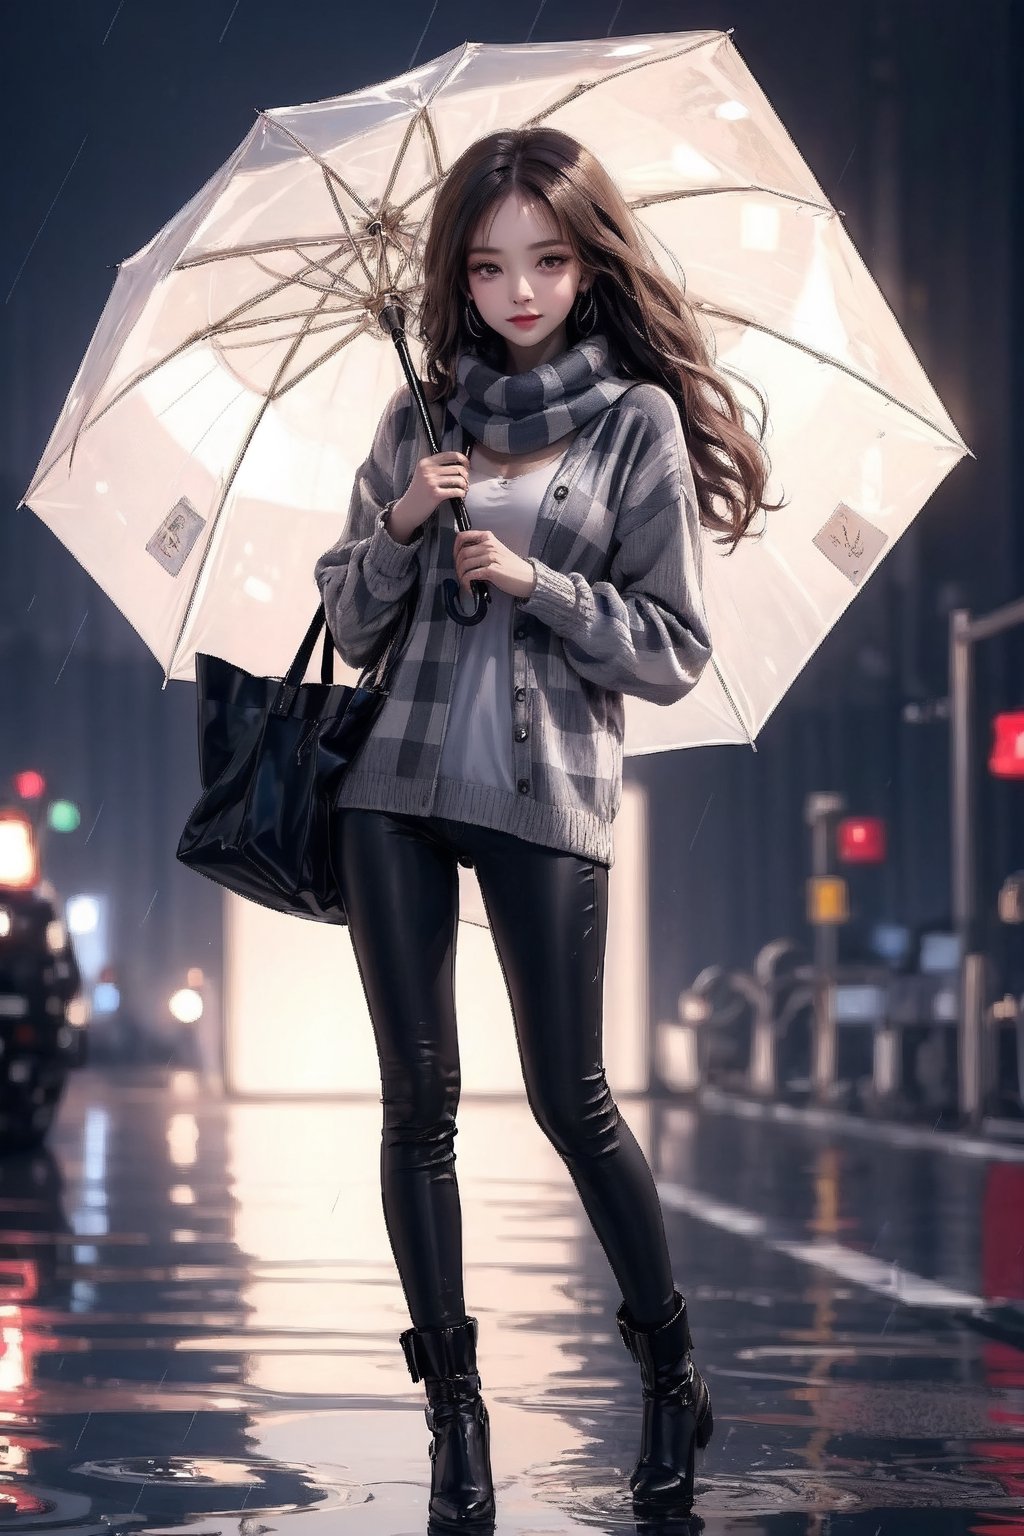 Best picture quality, high resolution, 8k, realistic, sharp focus, realistic image of elegant lady, Korean beauty, supermodel, Full body, raining, holding a cat, checkered colorful scarf, tote bag, umbrella, night time, cute sweater, (wet body:1.0), 
(high quality:1.0) (white background:0.8), detailed face, (blush:0.8), 1 girl,Young beauty spirit, ZGirl, perfect light, Detailedface,1 girl, big eyes, eye shadow ,SharpEyess, 
,perfecteyes eyes ,Smirk,Detailedface, perfect light,ZGirl,photo of perfecteyes eyes,nodf_lora,DonMSn0wM4g1c,yofukashi background,portrait,wrenchsmechs,ASU1